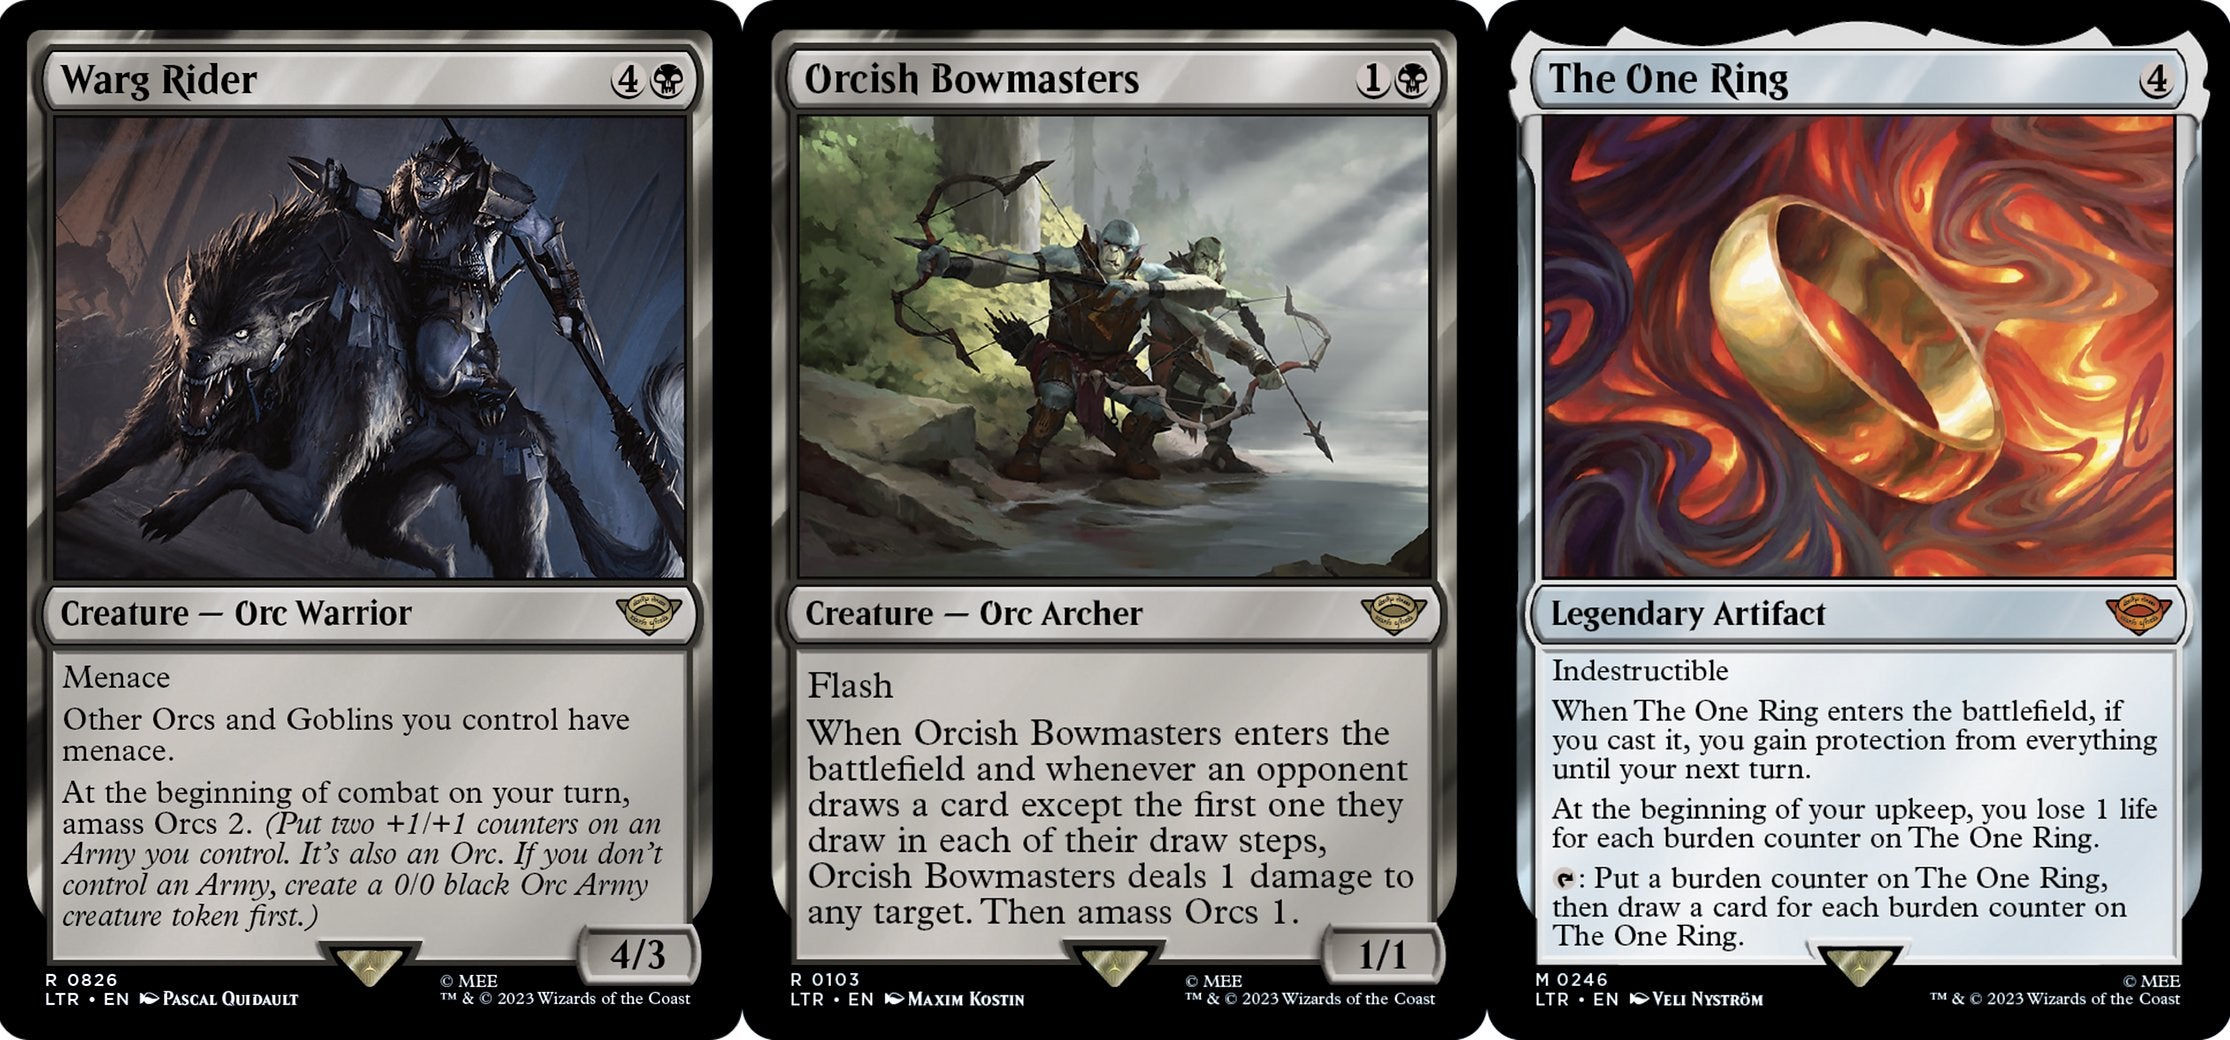 The Warg Rider, Orcish Bowmasters, and The One Ring cards in MTG.